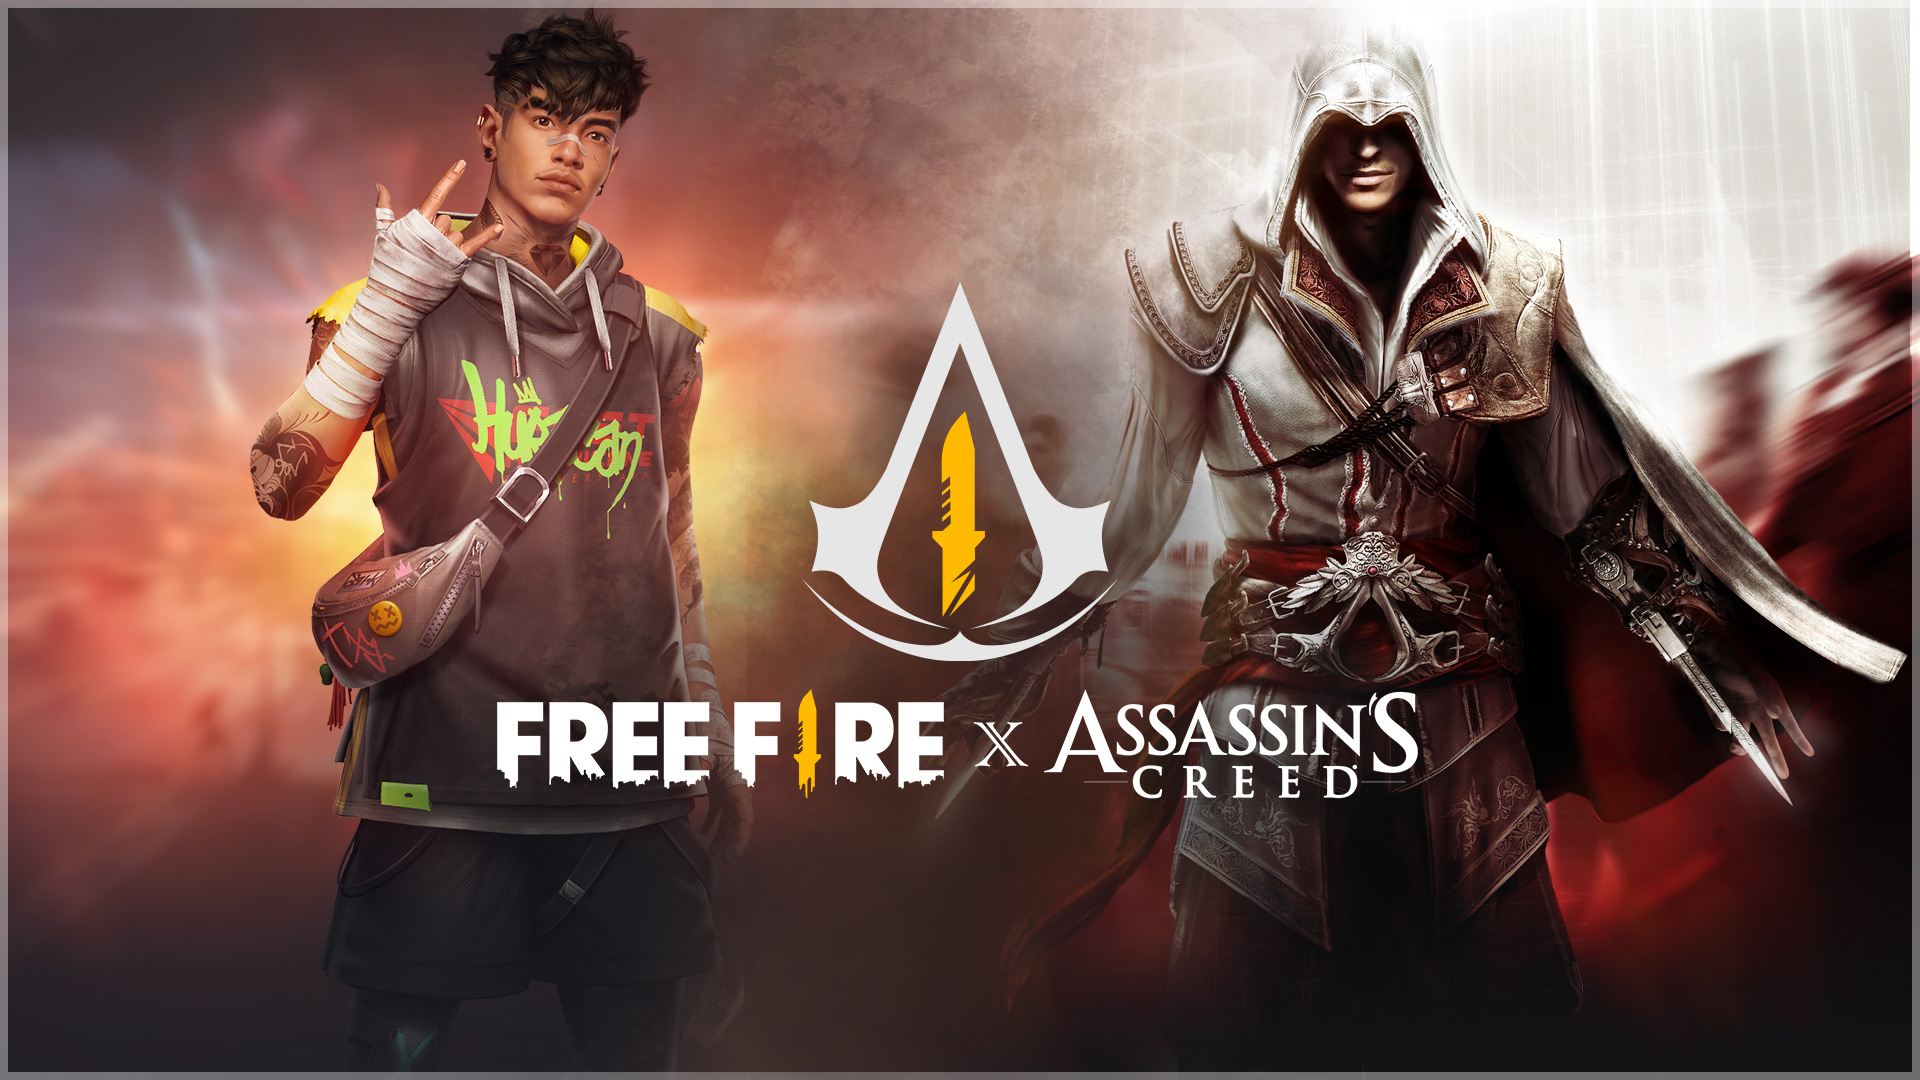 Garena Free Fire PNG Transparent Images Free Download | Vector Files |  Pngtree